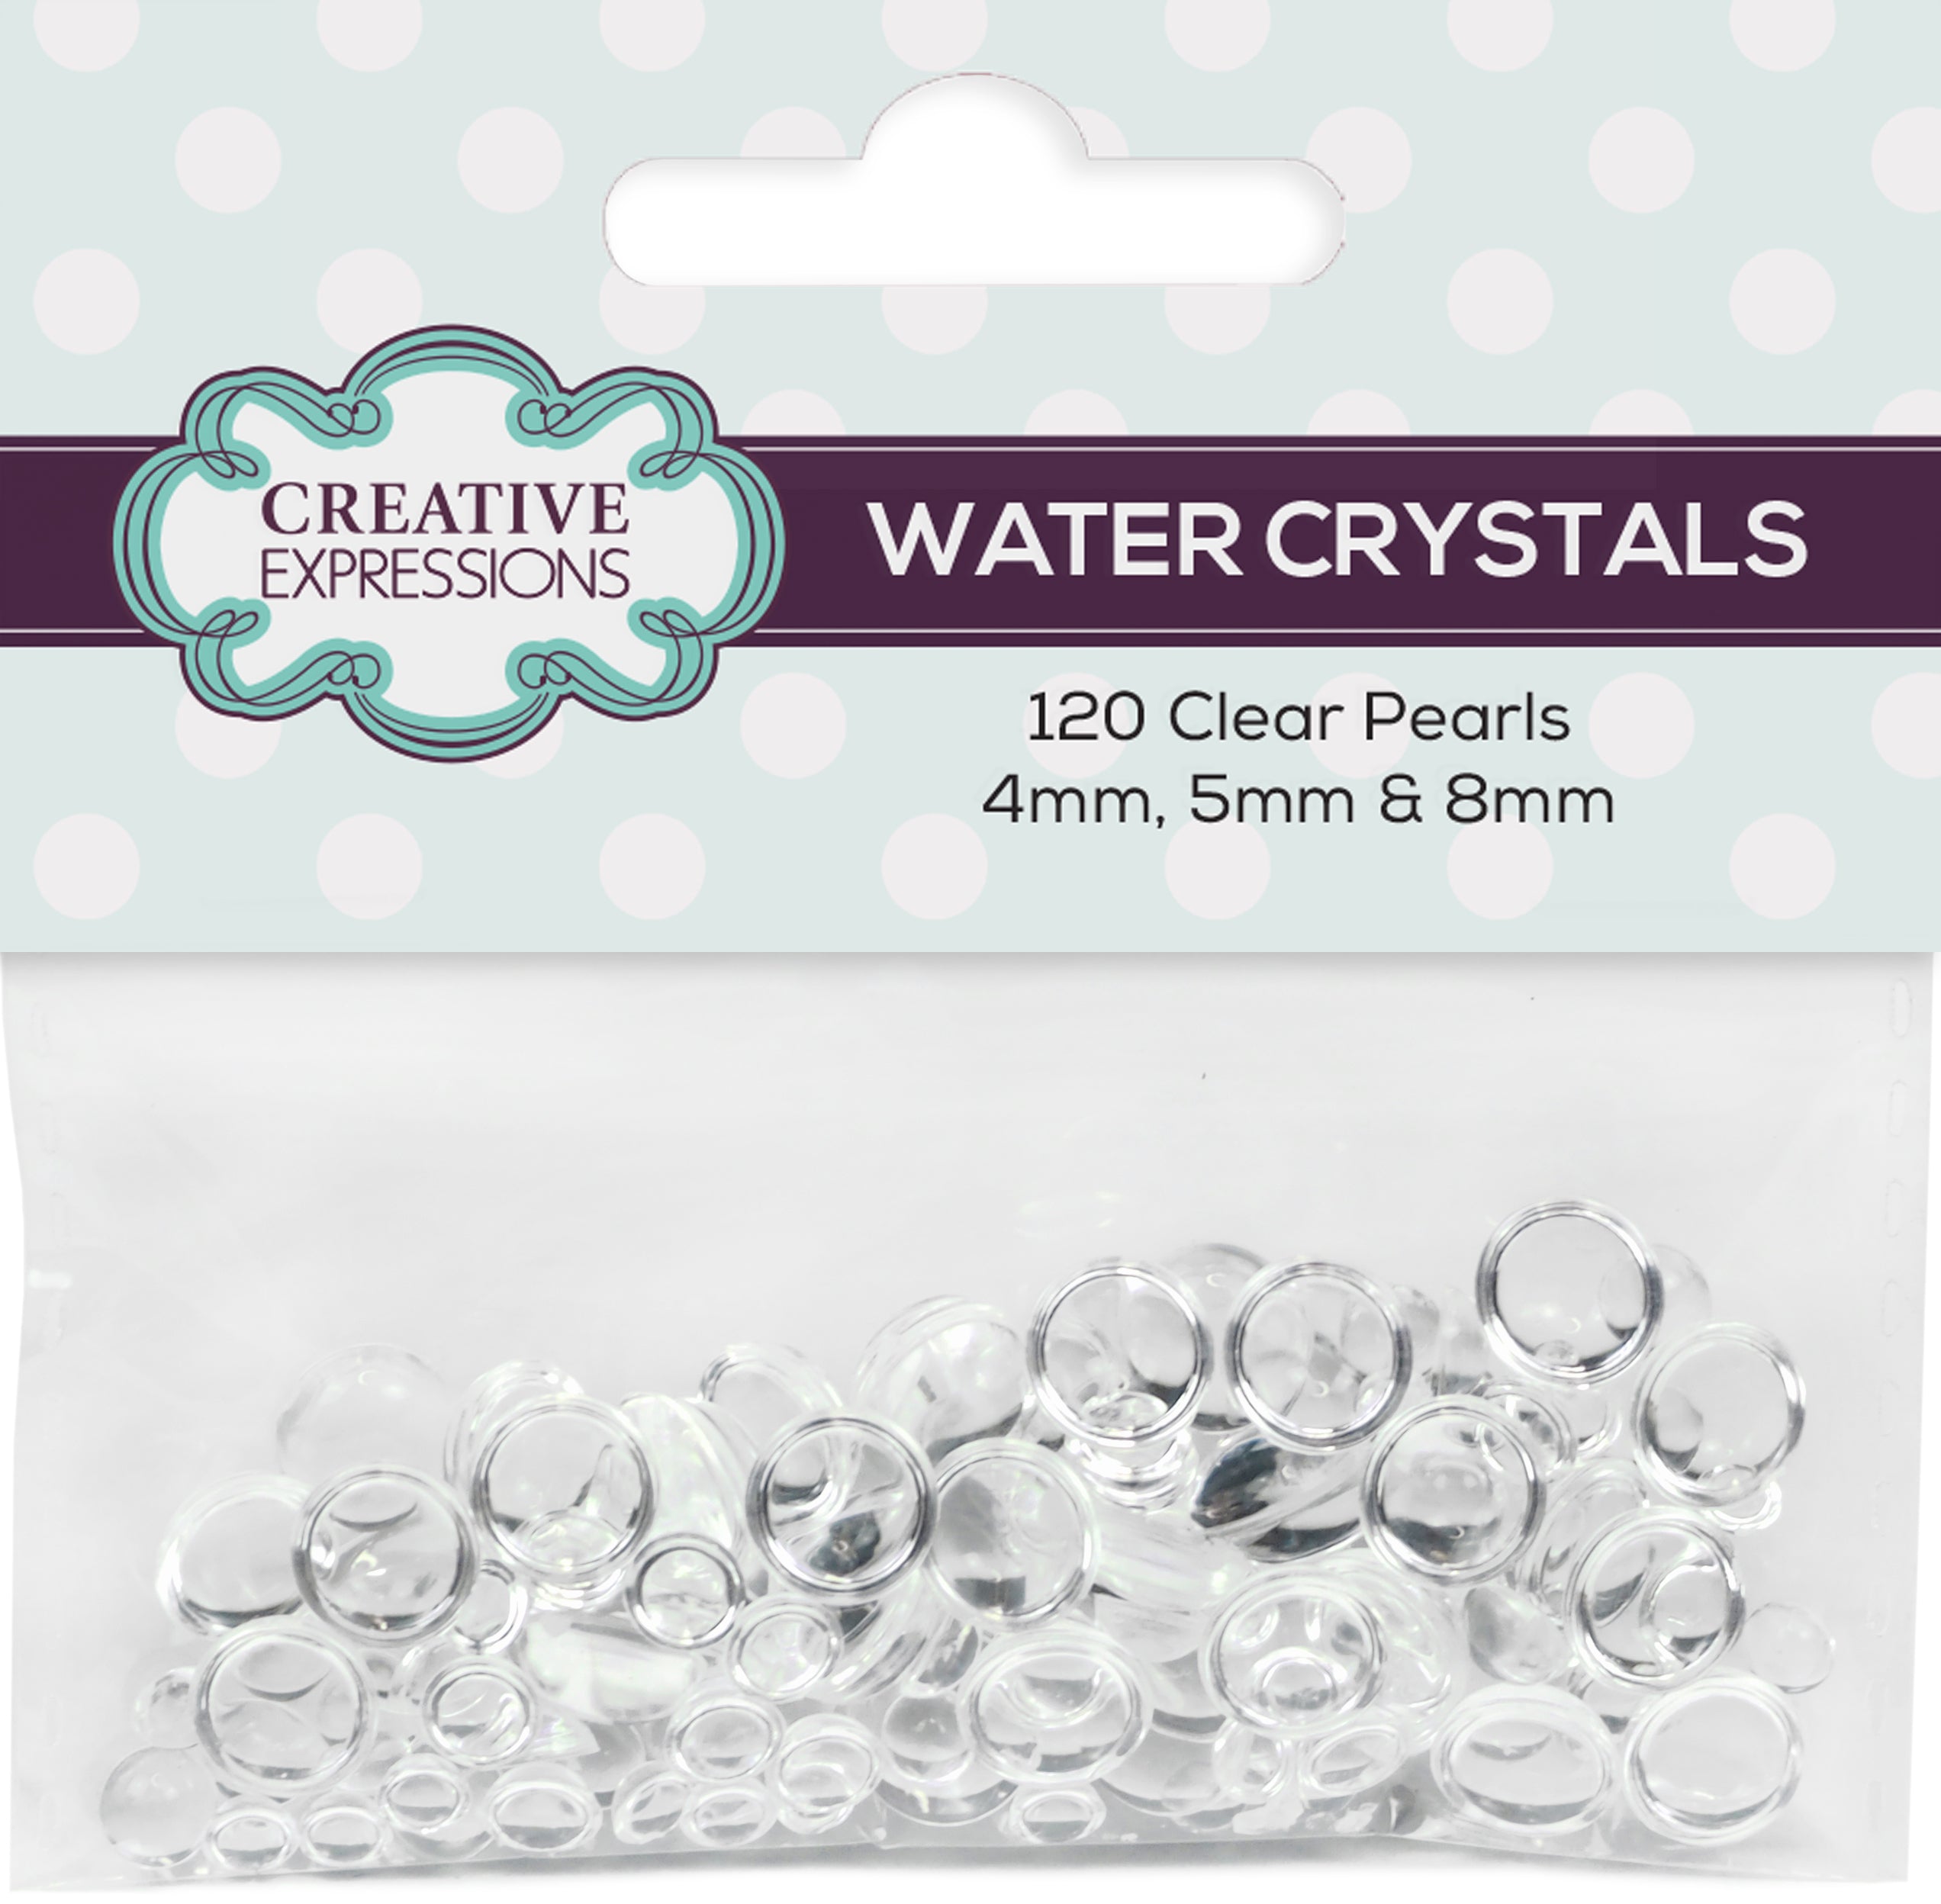 Creative Expressions Water Crystals Pk 120 (40 each 4mm, 5mm & 8mm)